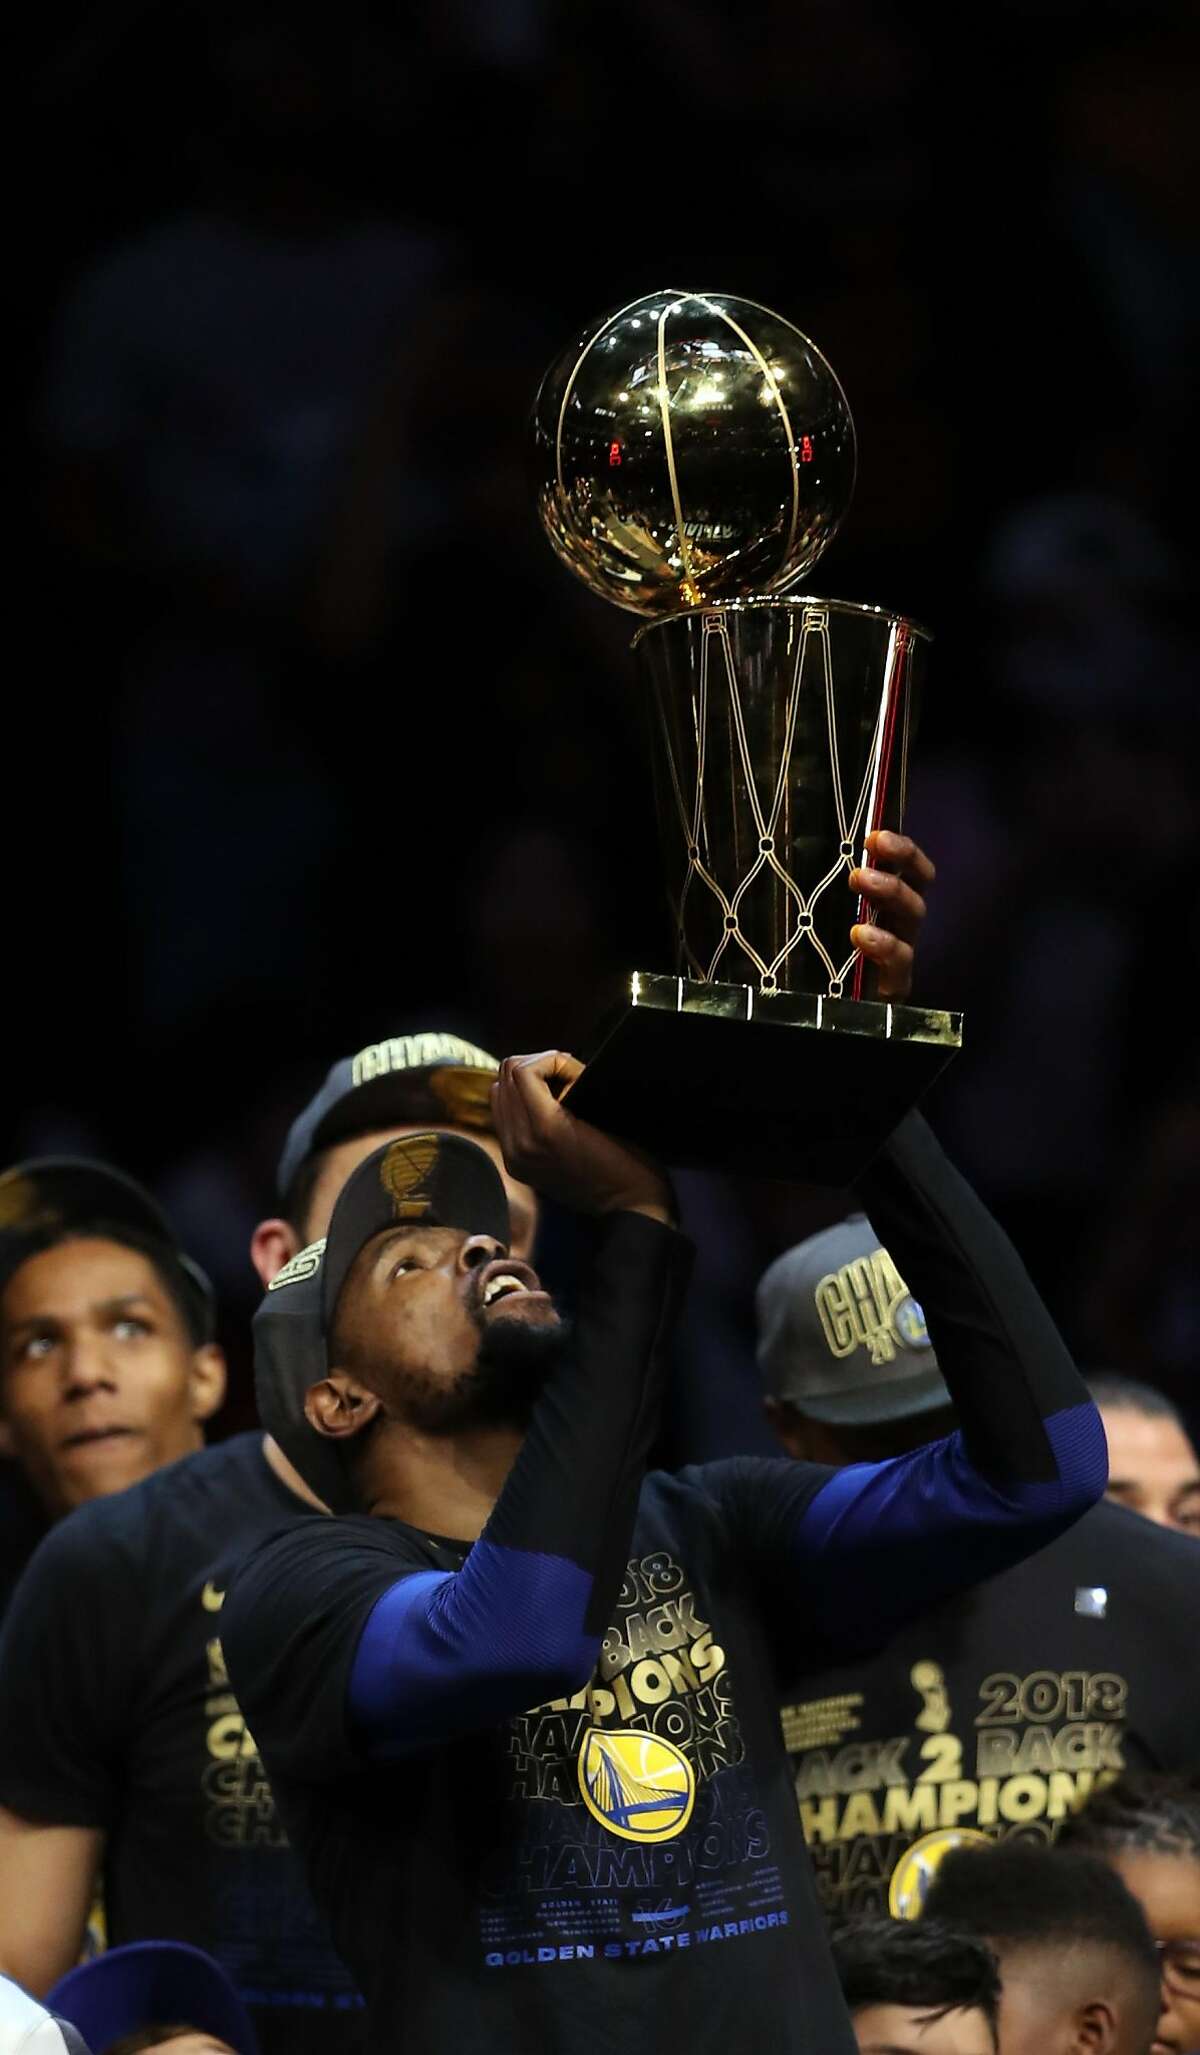 Golden State Warriors' Kevin Durant celebrates the Warriors' 3rd NBA Championship in 4 years after a 108-85 win over Cleveland Cavaliers in Game 4 of the NBA Finals at Quicken Loans Arena in Cleveland, OH on Friday, June 8, 2018.